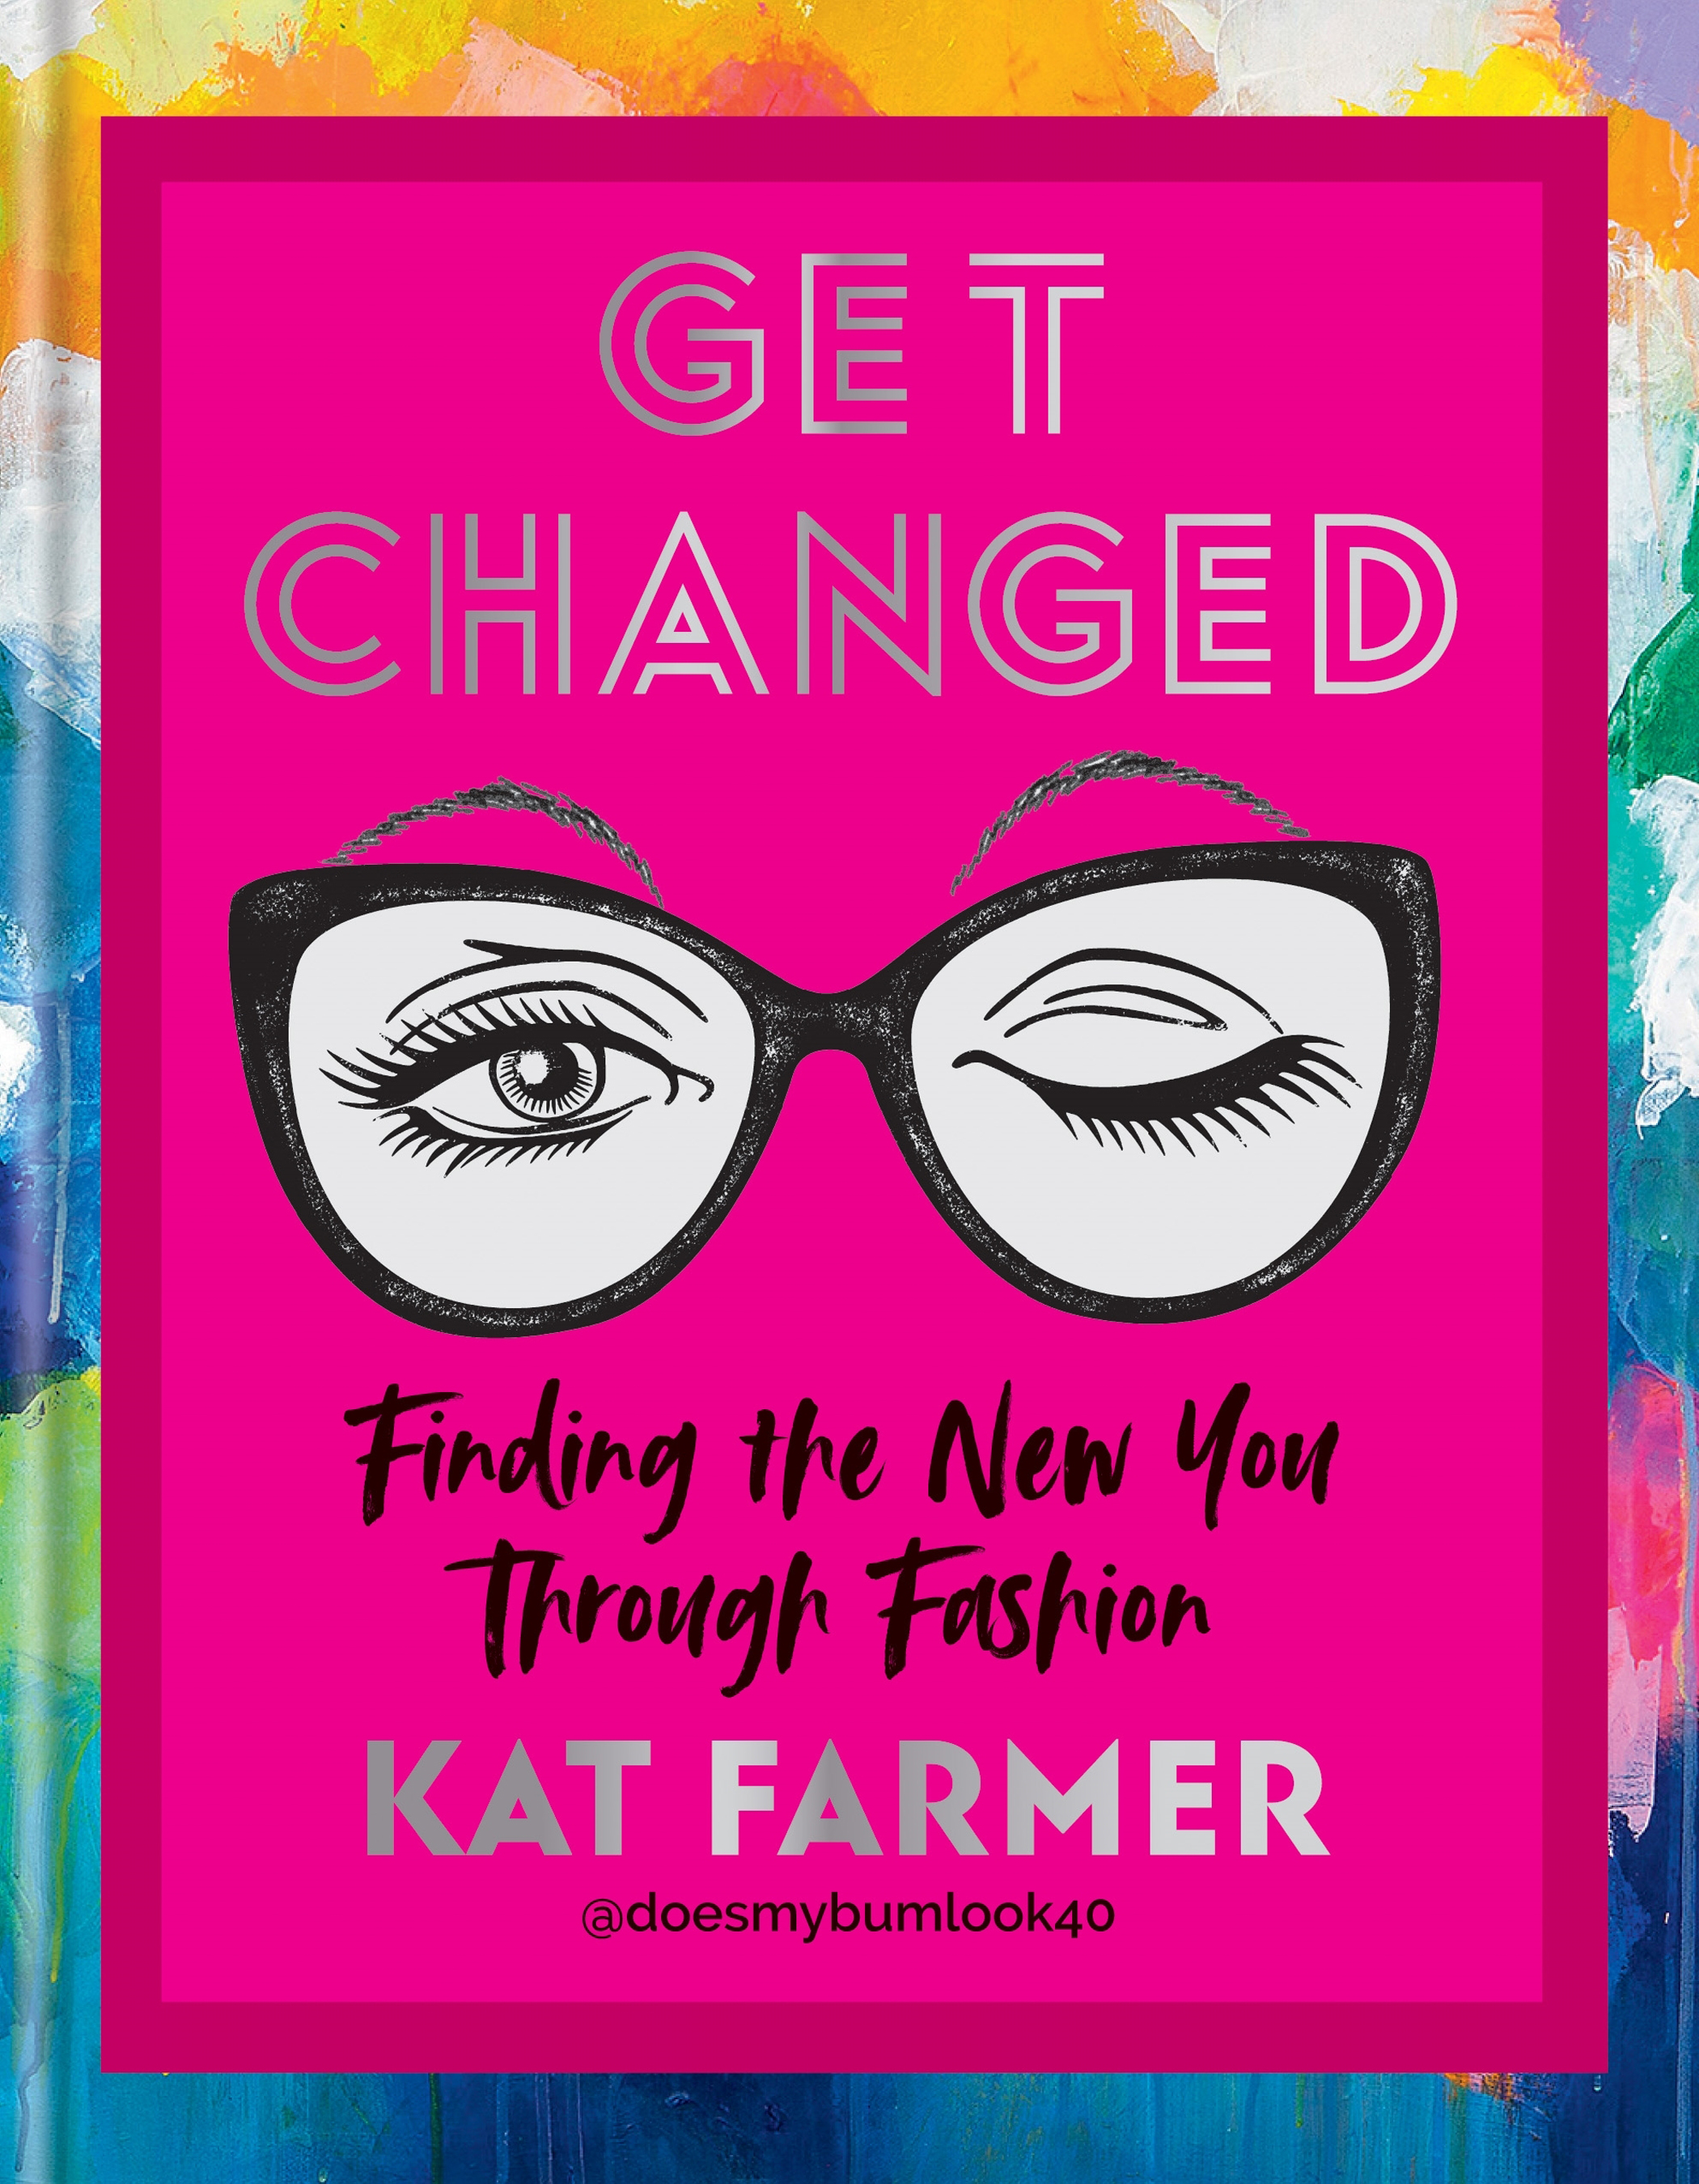 Get Changed: Finding The New You Through Fashion by Kat Farmer is published by Hachette on March 31, priced £20